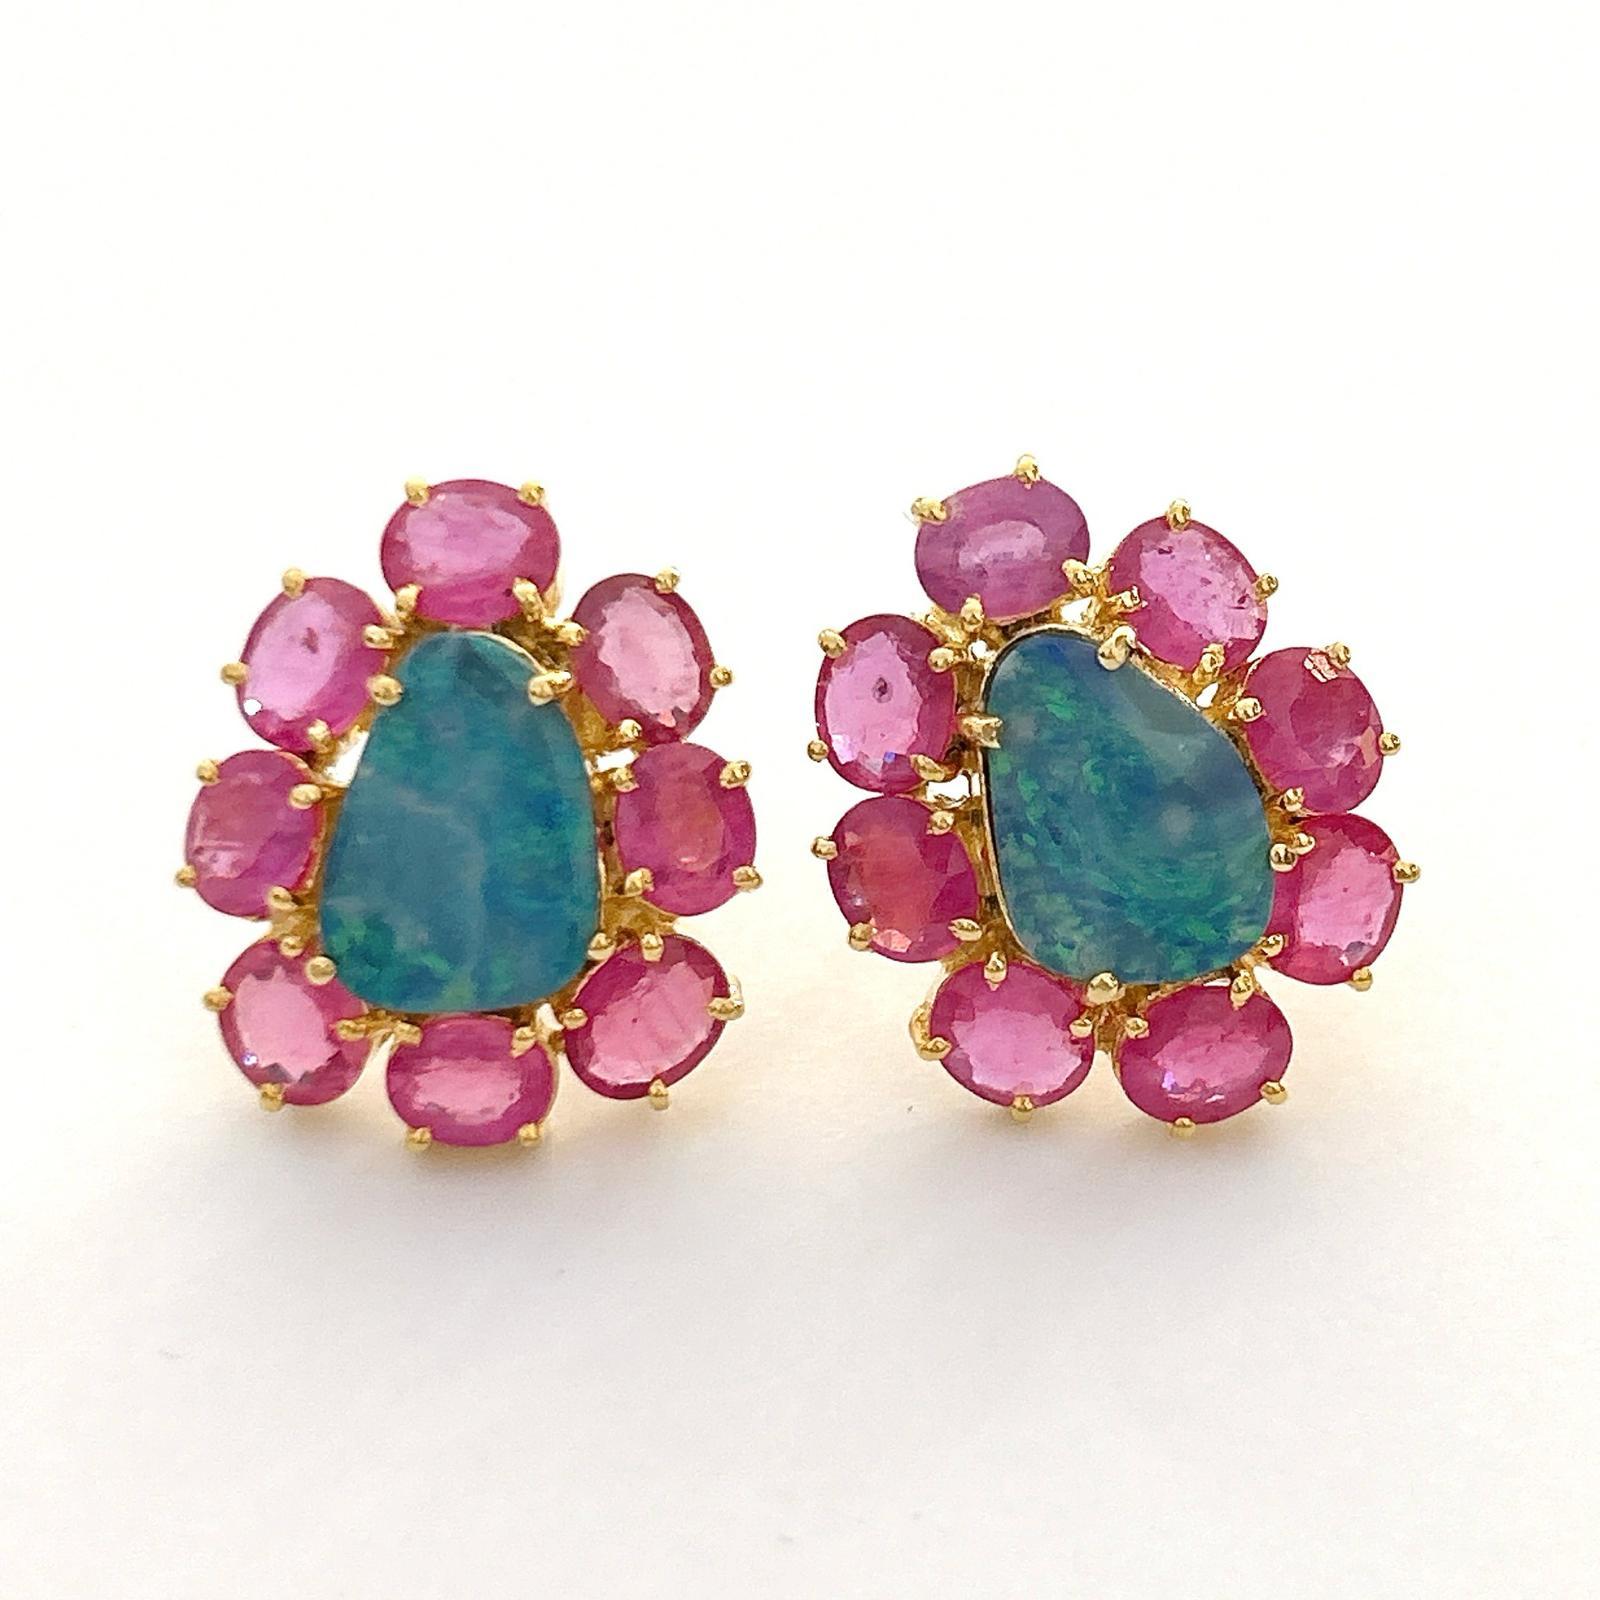 Bochic “Orient” Blue Opal & Red Ruby Earrings Set In 18K Gold & Silver 

Oval Cut Natural Ruby Pinkish Red Color  - 6 Carats 
Blue Opals - 14 Carats 

The earrings from the 